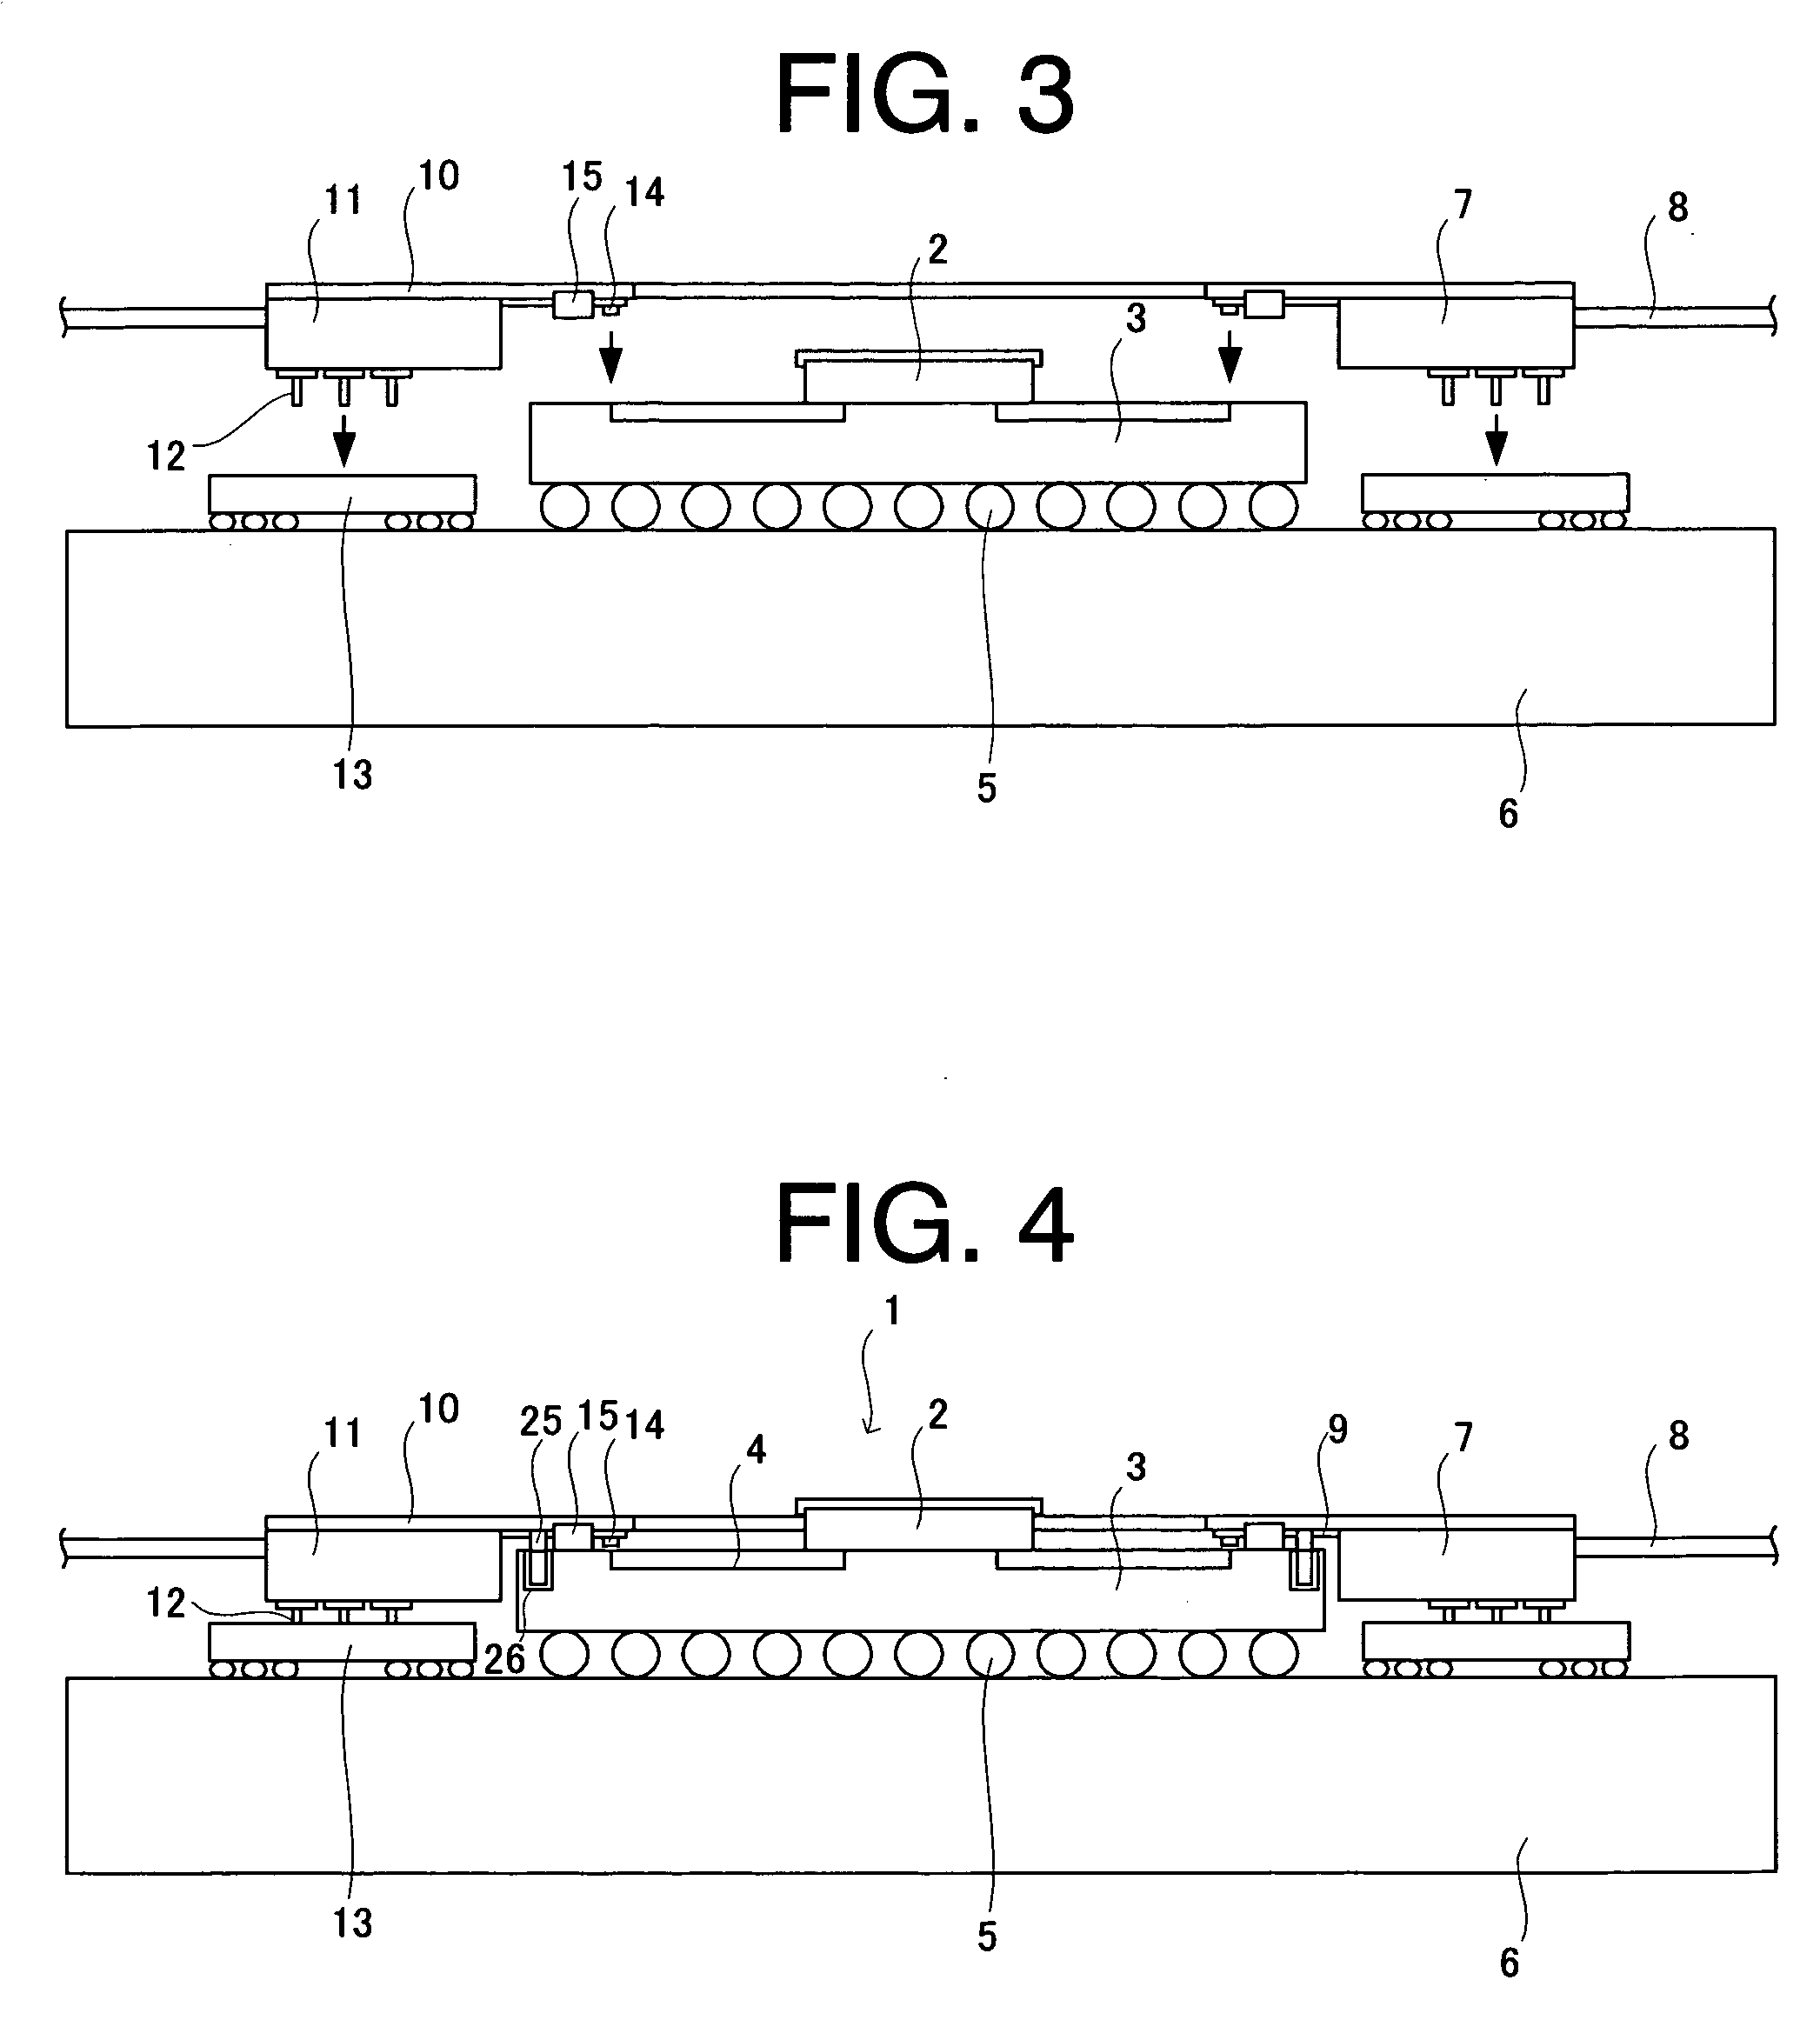 LSI package with interface module, transmission line package, and ribbon optical transmission line